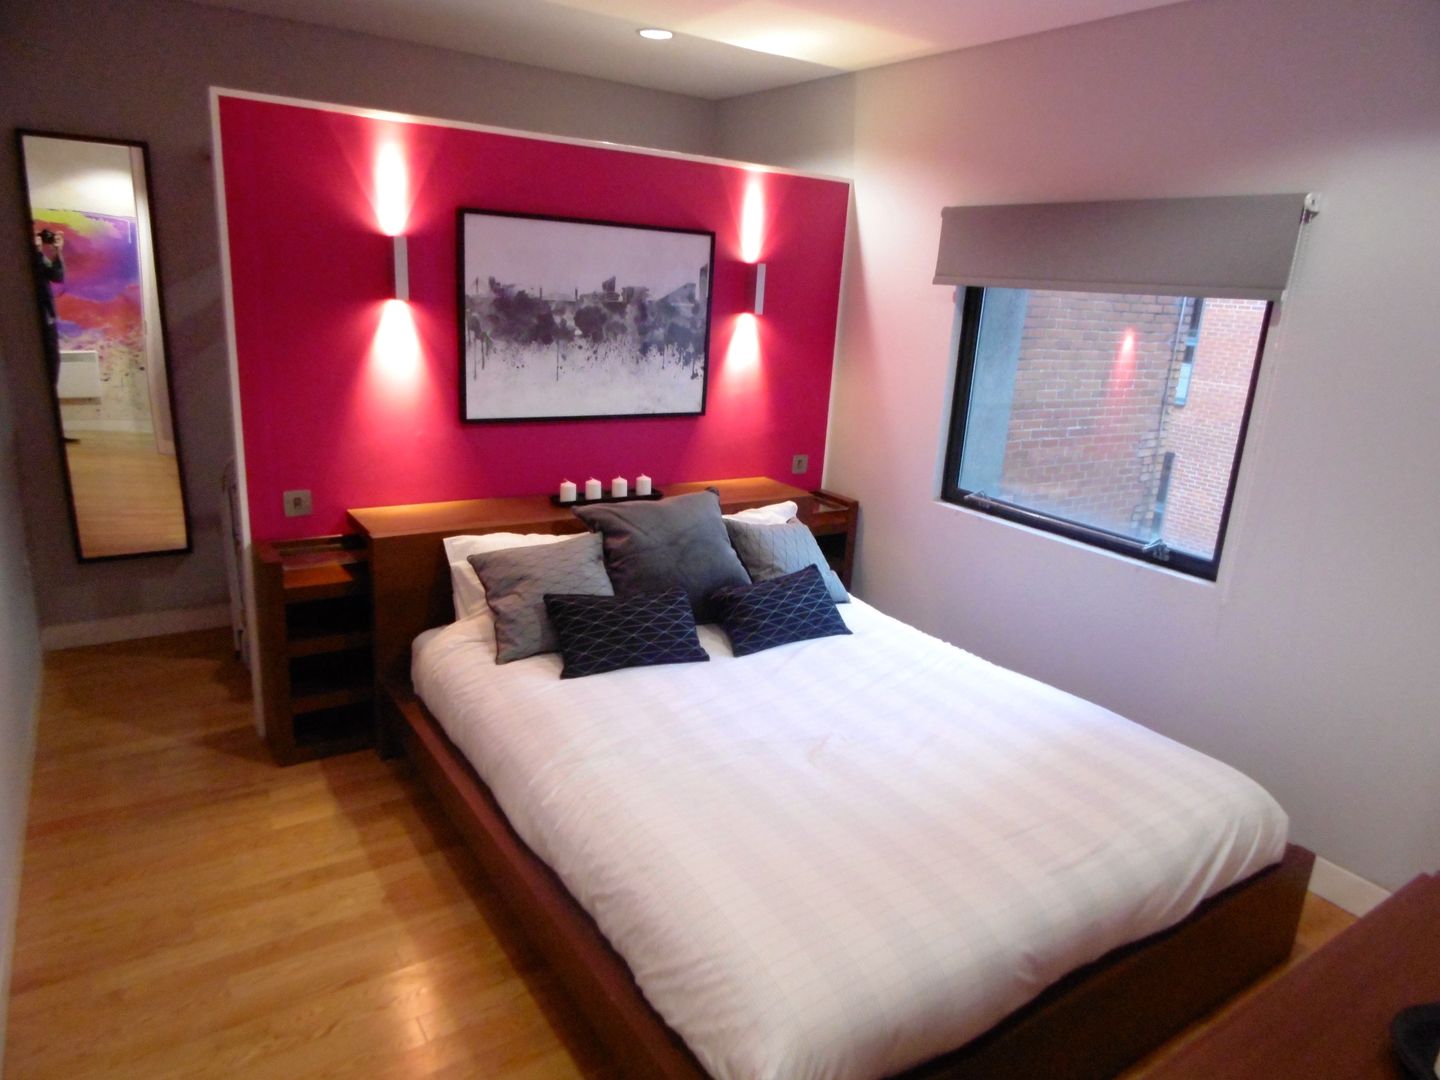 City Centre Apartment, Northern Quarter, Manchester, UK, Flawless Concepts Ltd Flawless Concepts Ltd Modern style bedroom